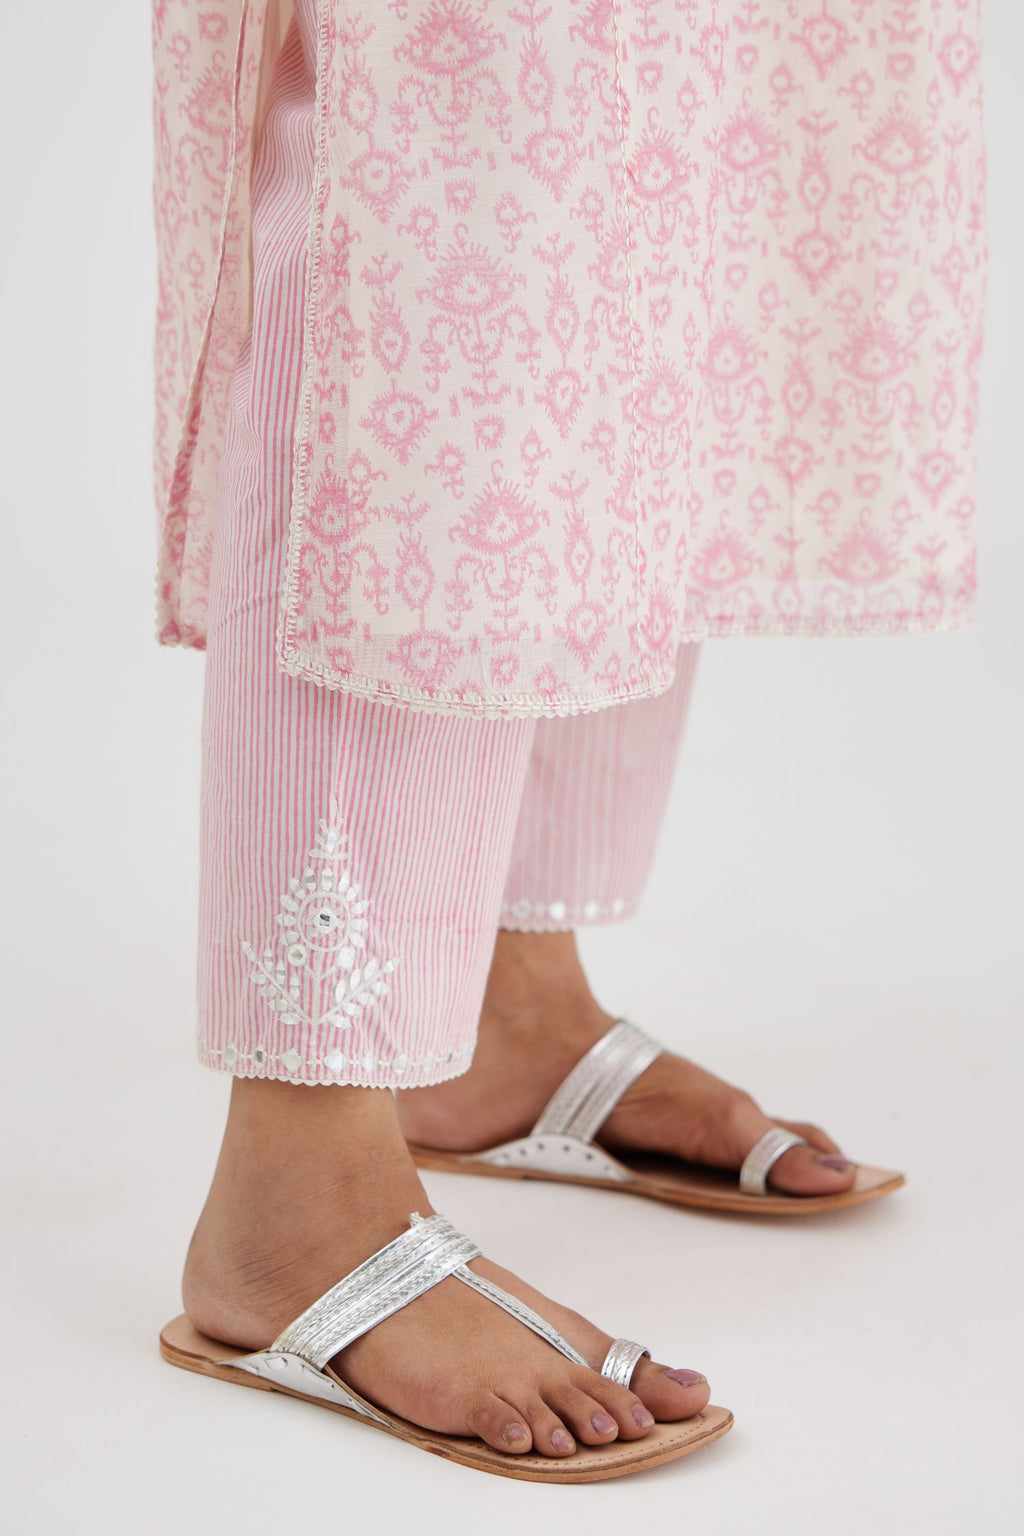 Ikat design pink and off white hand block-printed Cotton Chanderi straight long kurta set with round neck and front button placket.